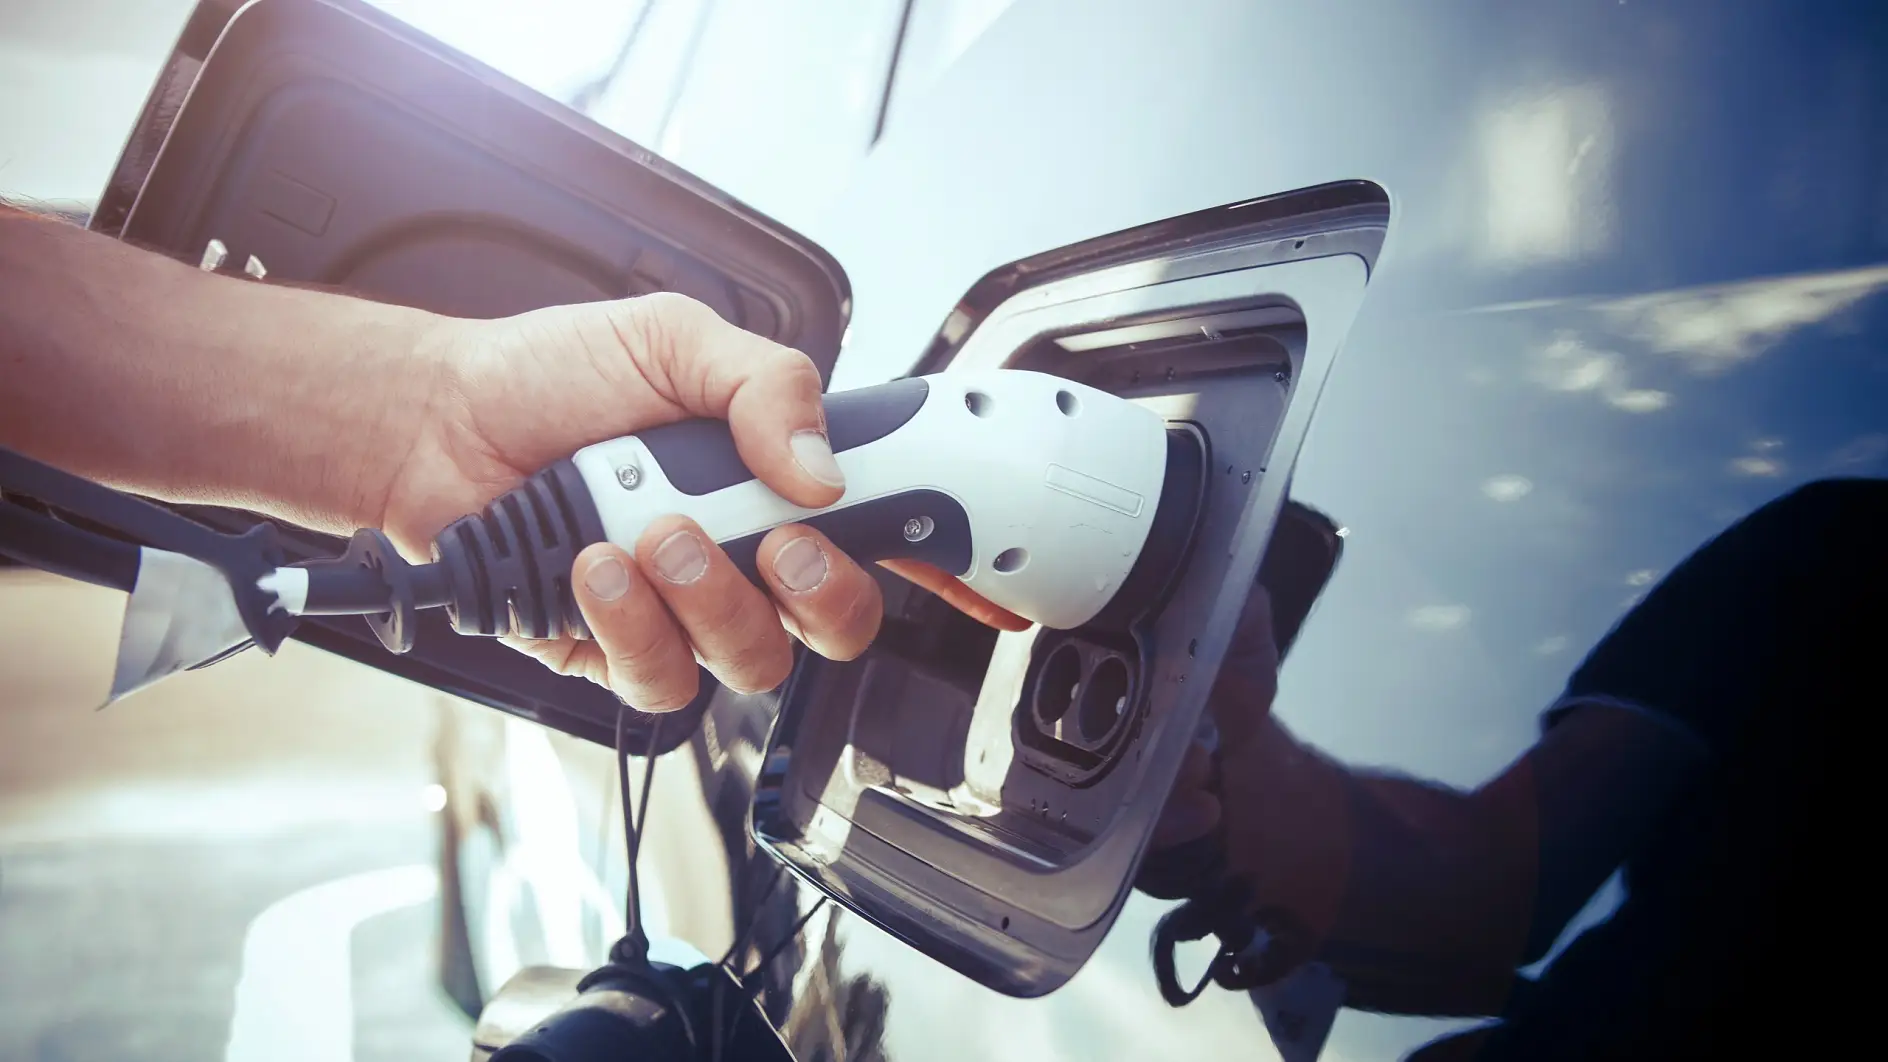 Color image of a man's hand preparing to charge an electric car.